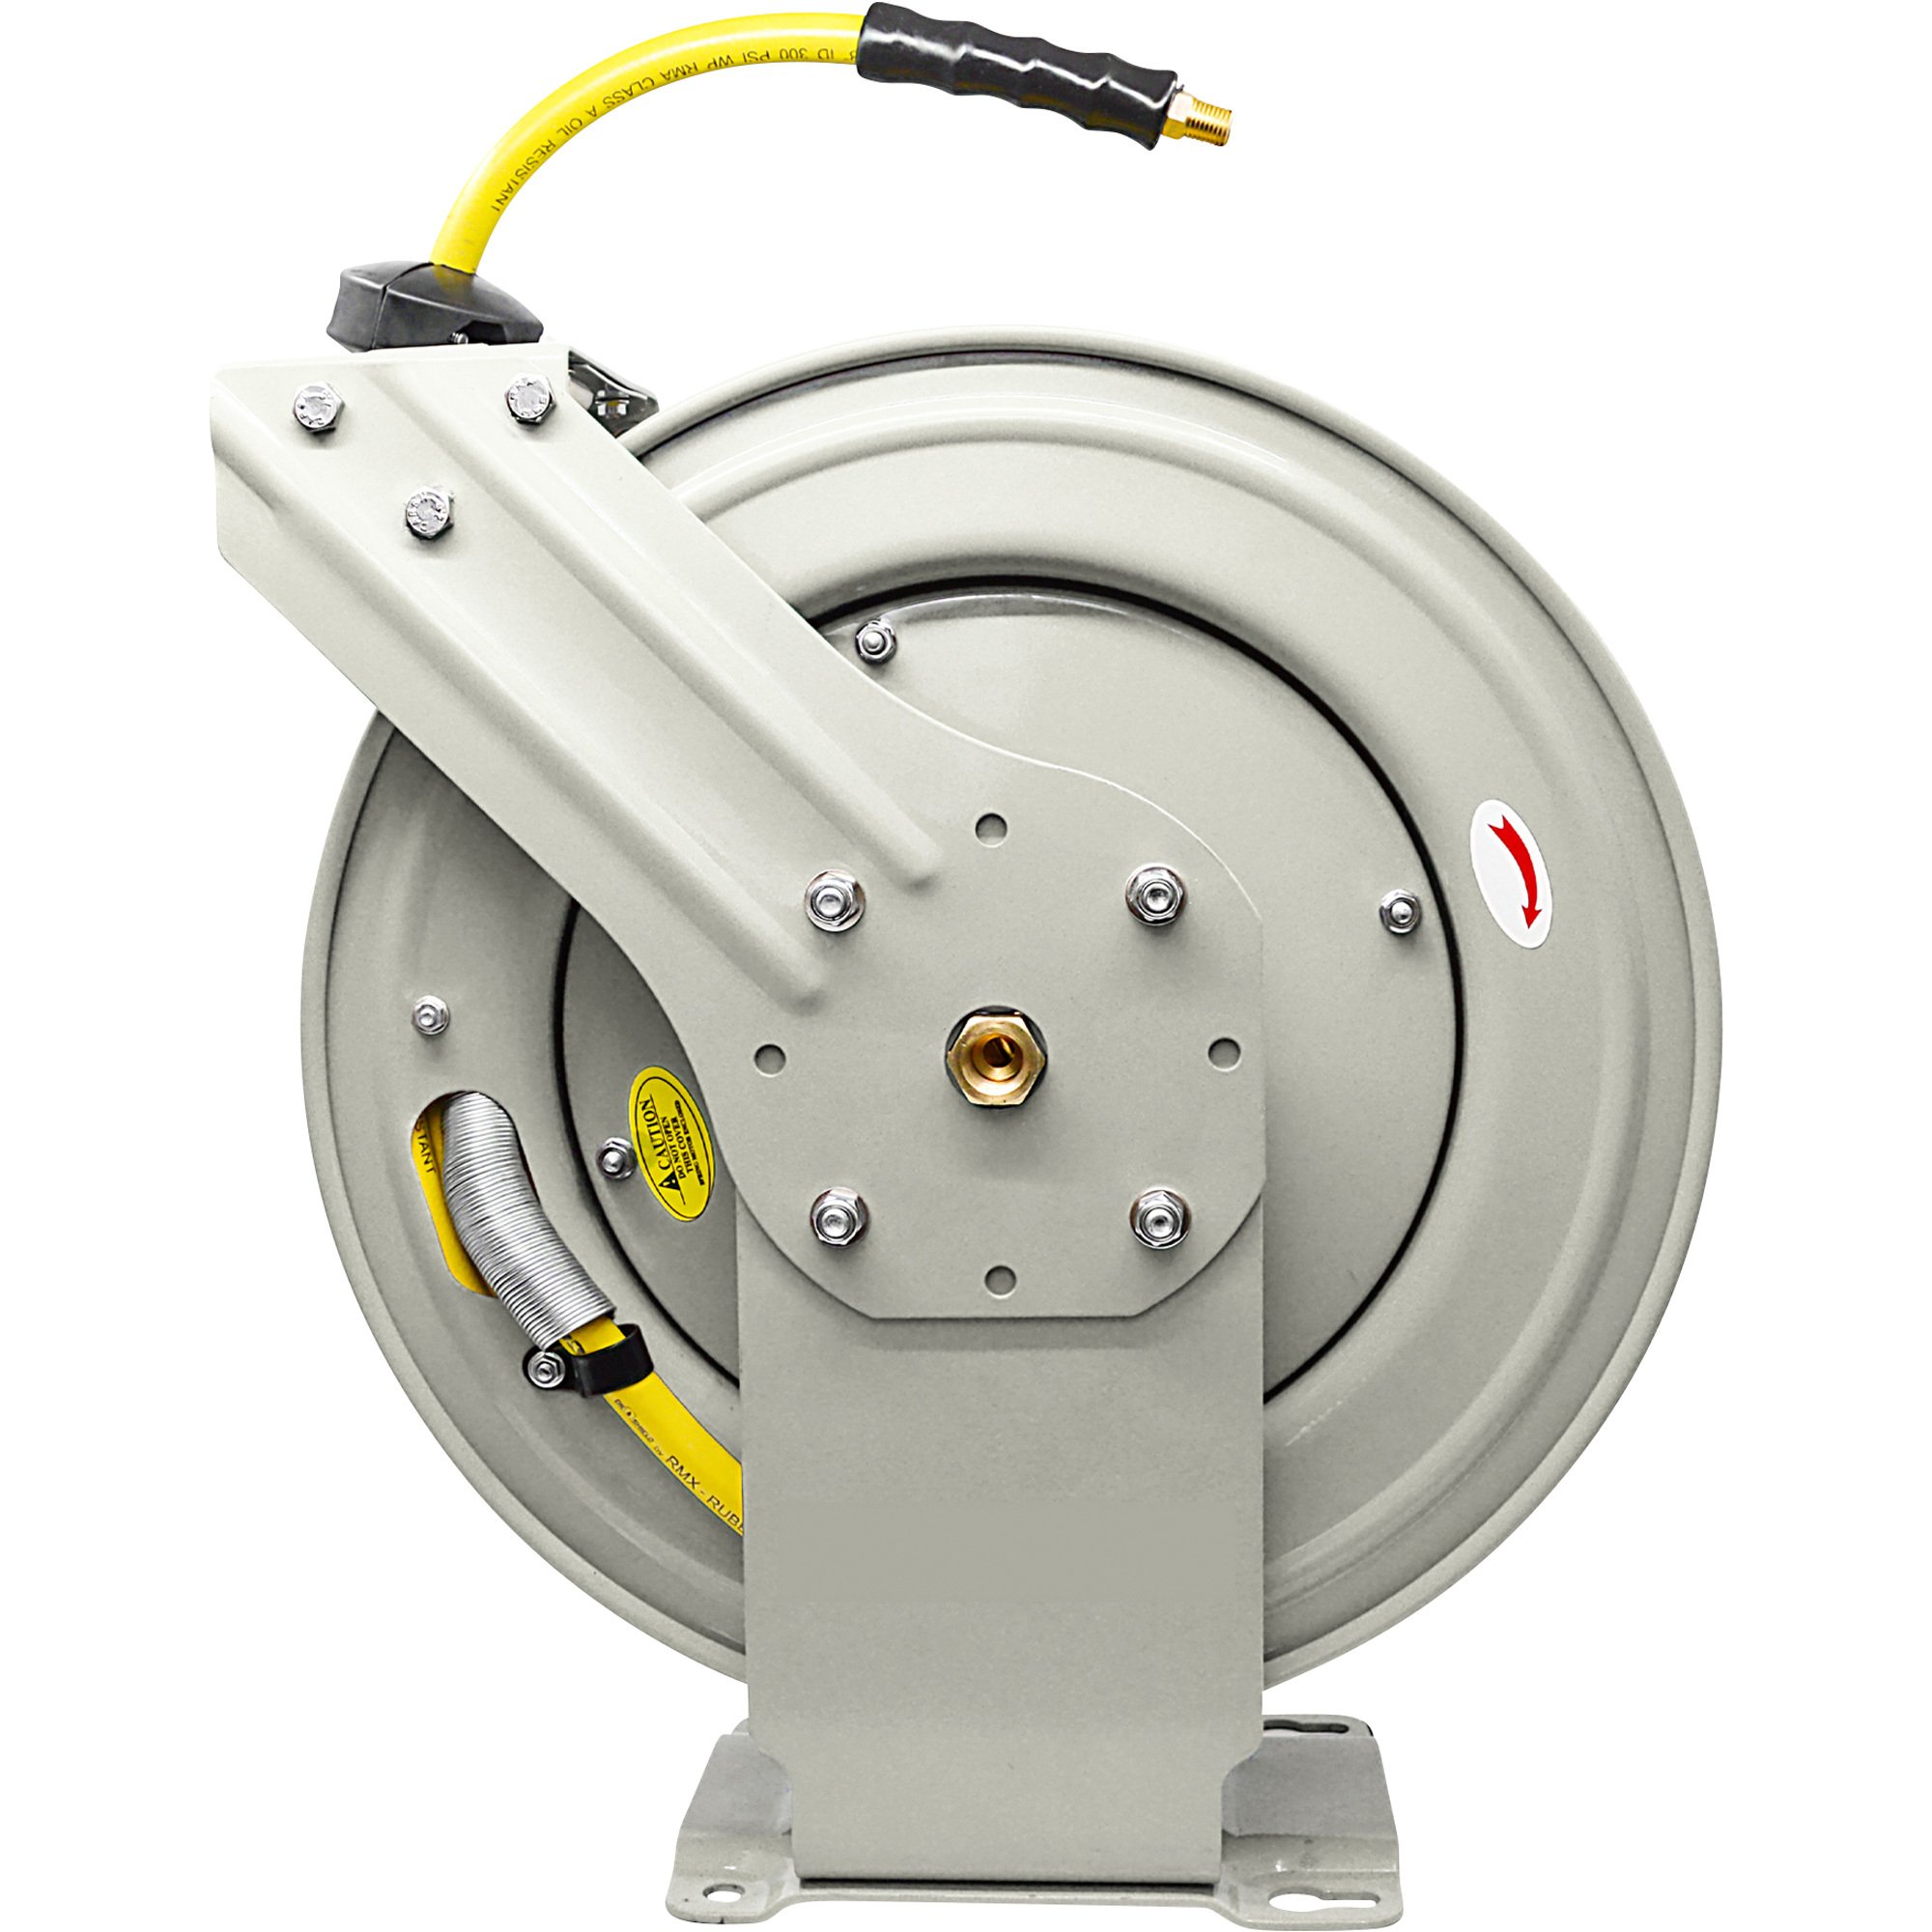 Klutch 49403 Compact Auto Rewind Air Hose Reel with 0. 375 x 50 ft. Hybrid  Hose, Max. 300 PSI 